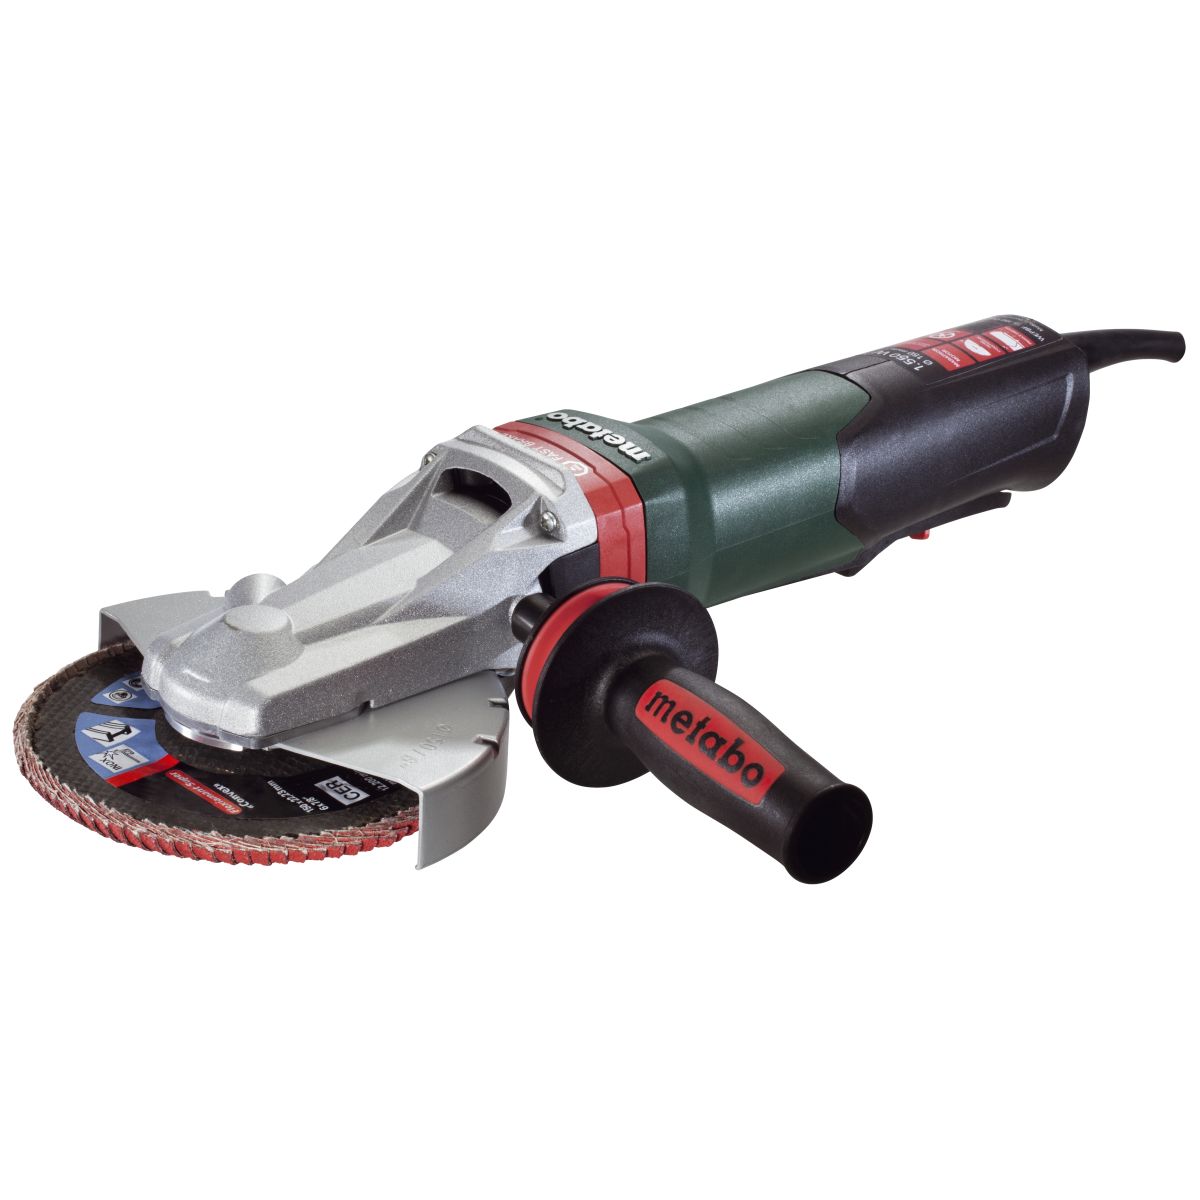 Metabo WEPBF 15-150 Quick 240V, 1,500W 6"